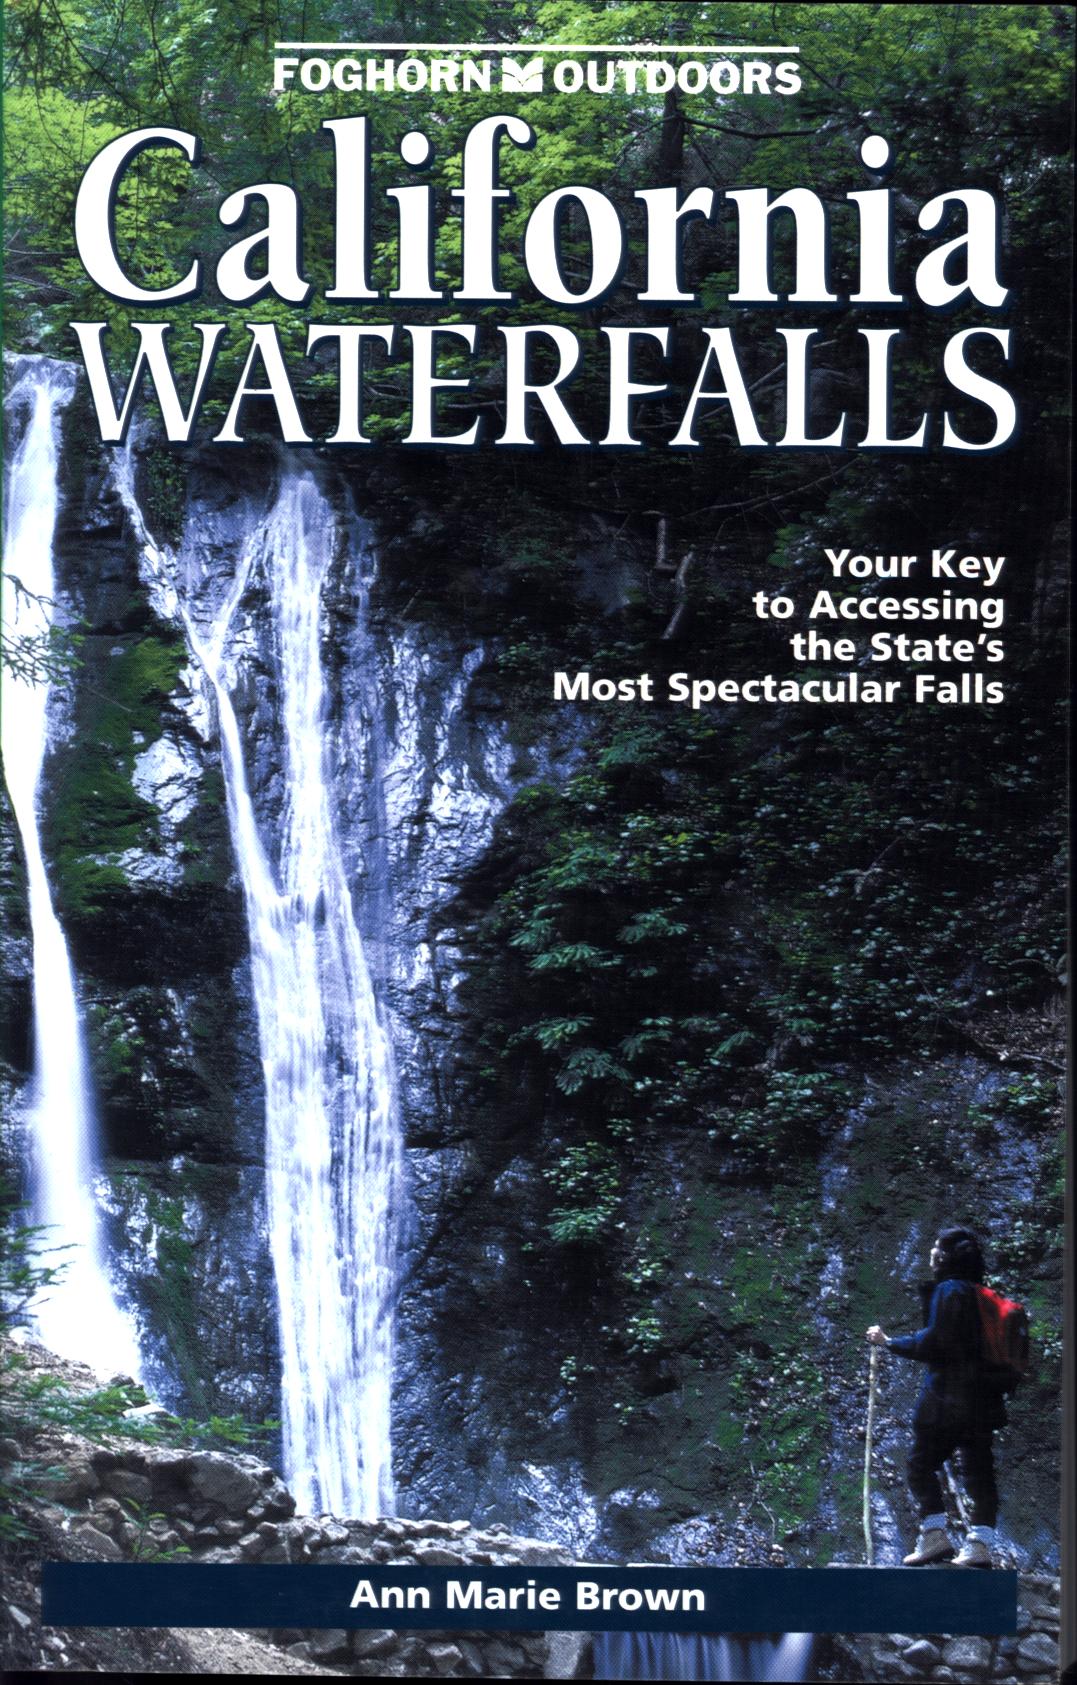 CALIFORNIA WATERFALLS: your key to accessing the state's most spectacular falls.